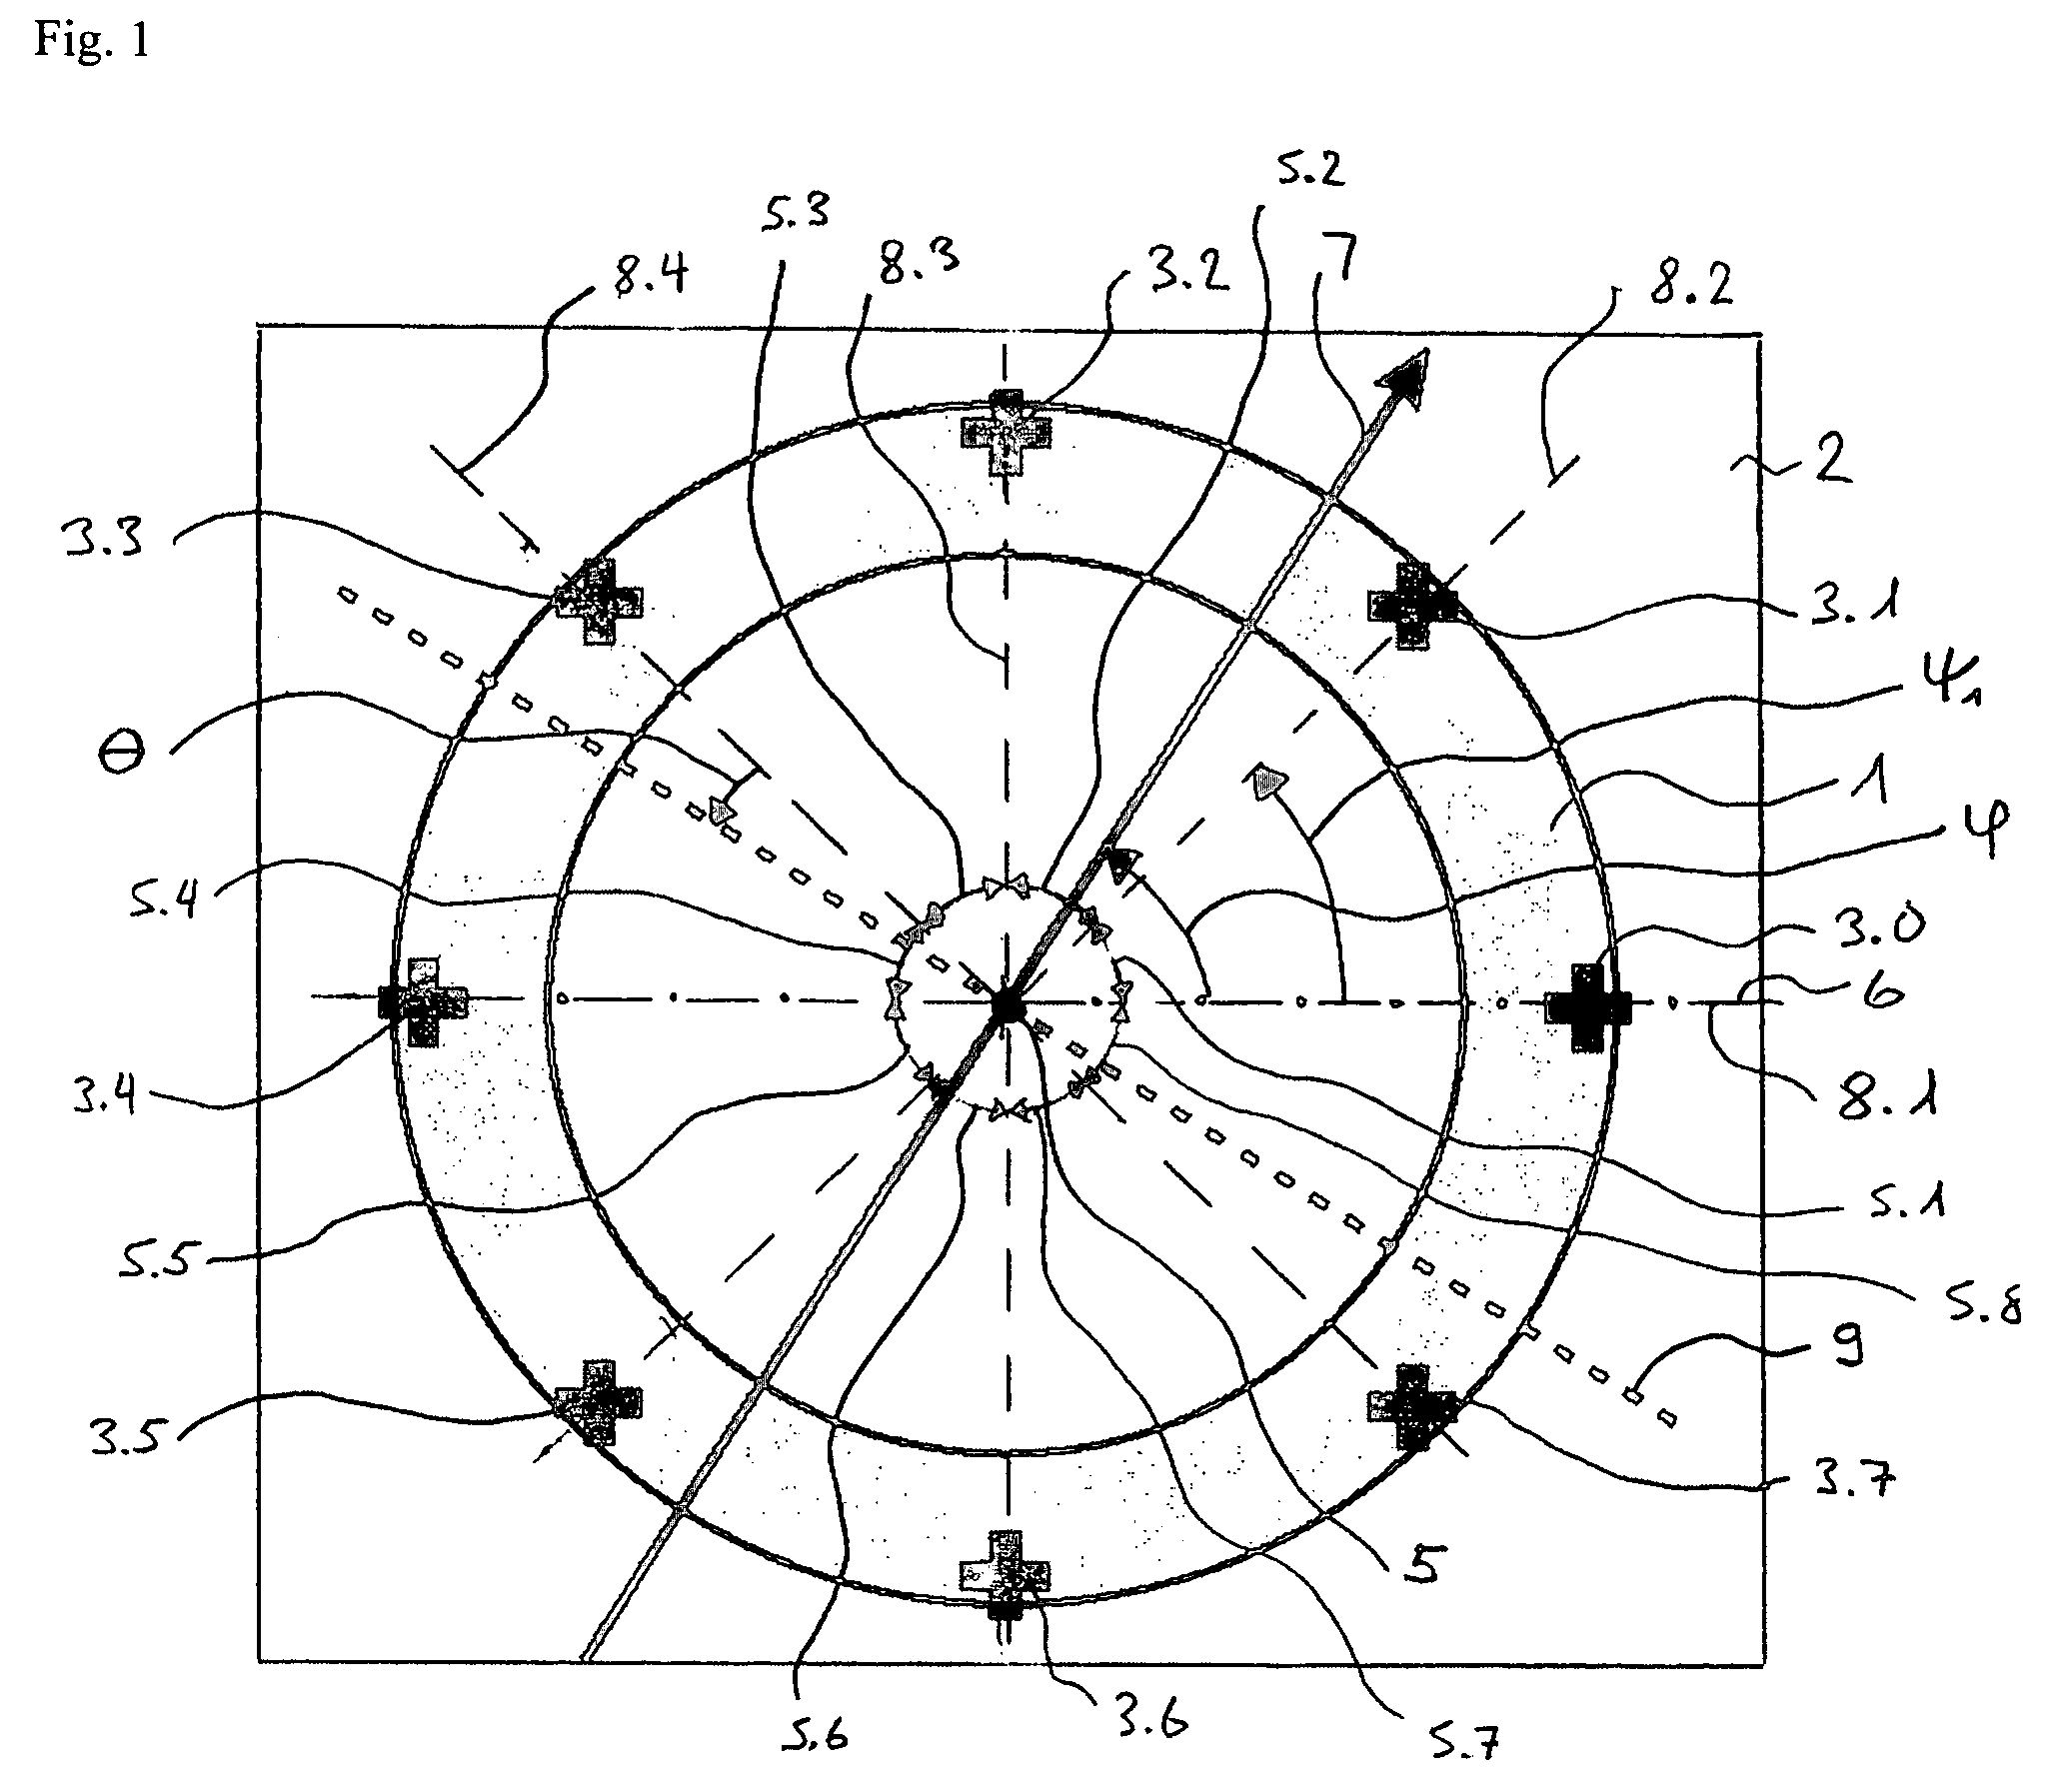 Sensor for detecting the direction of a magnetic field in a plane